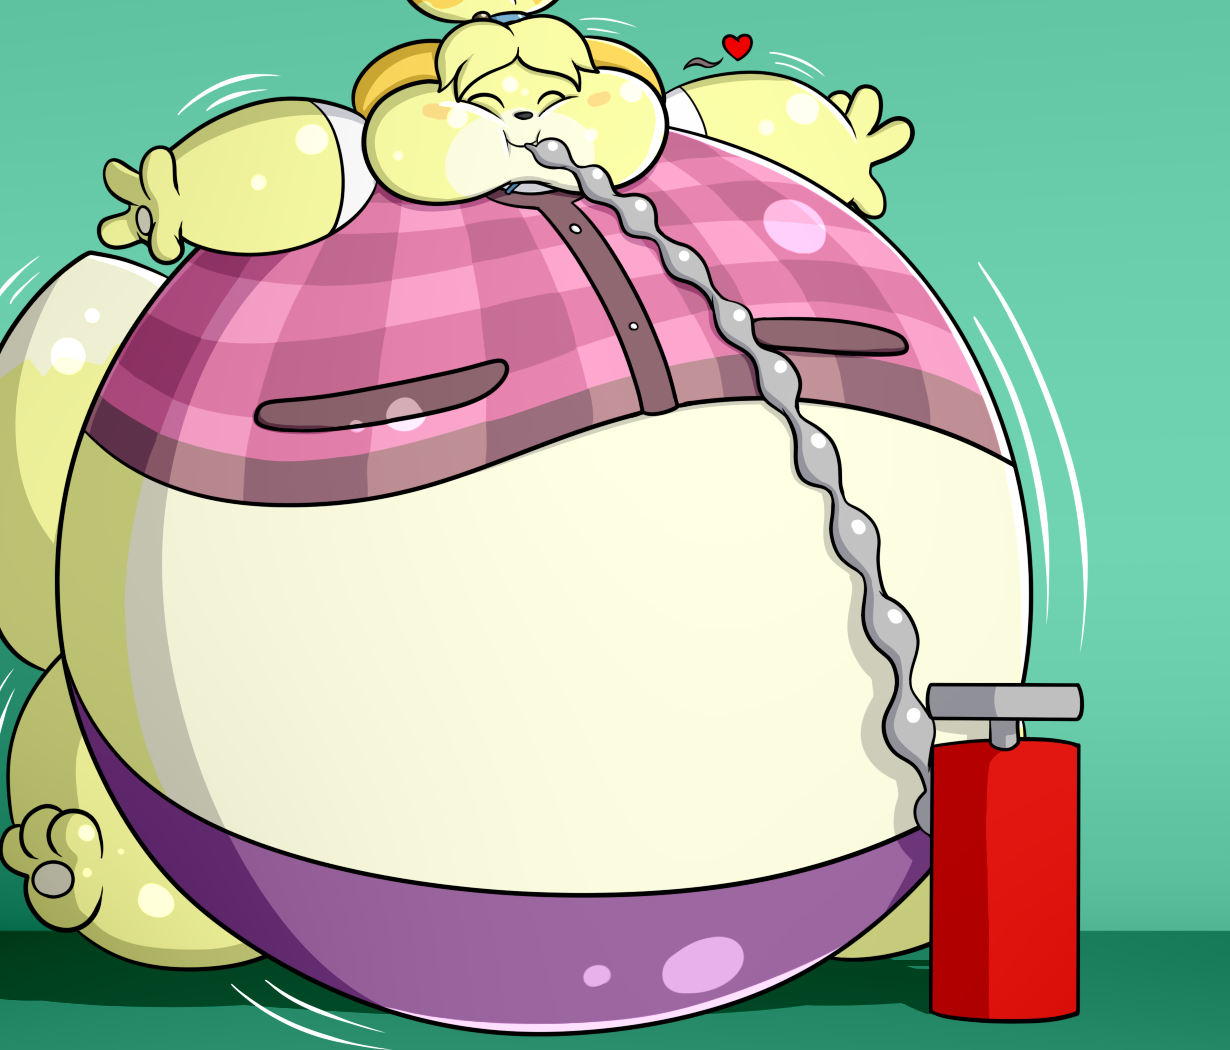 Isabelle Big Boobs Sleep - GIF by Puffylover69 on Newgrounds